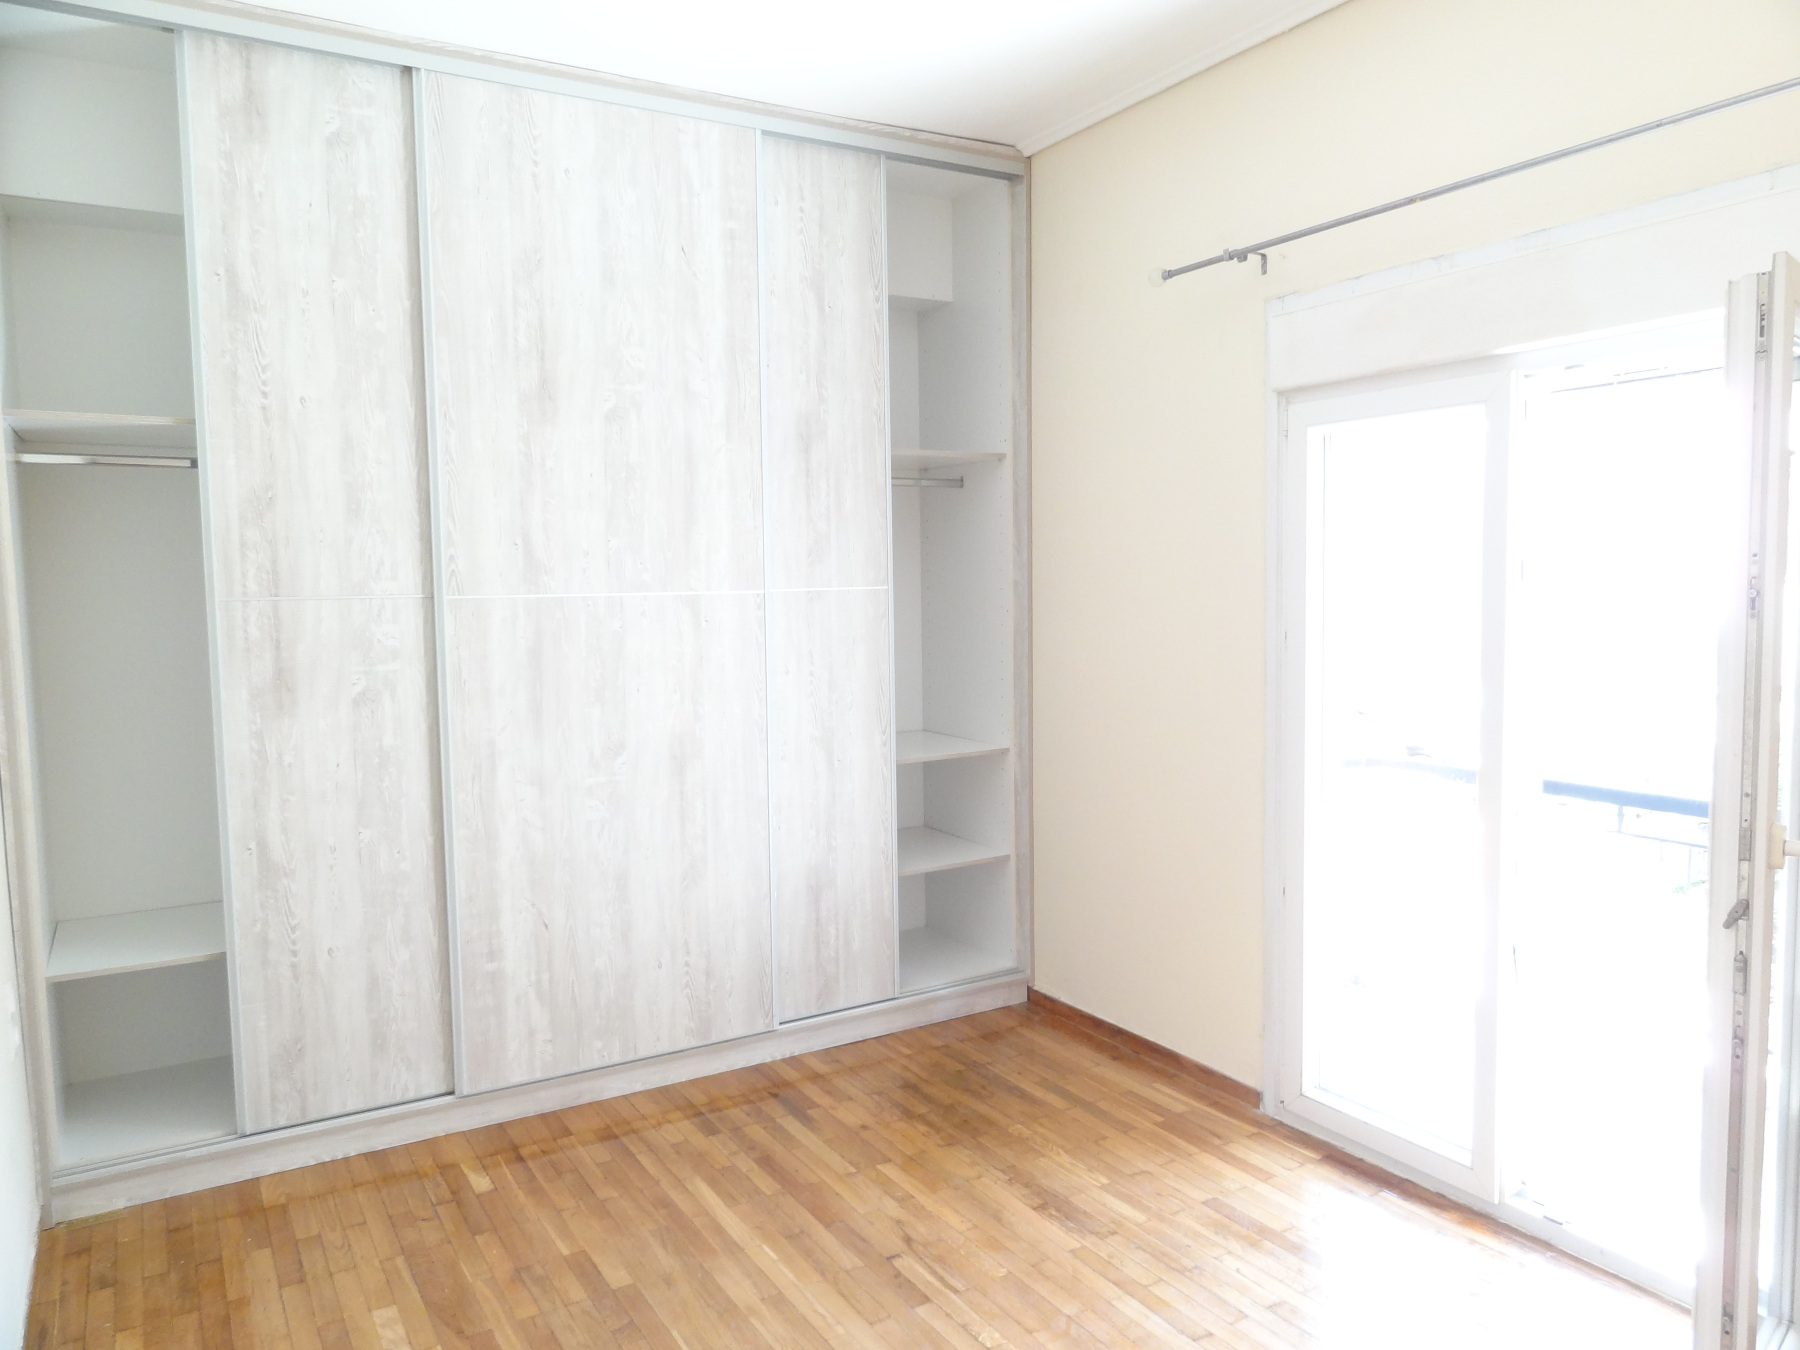 Bright 2 bedrooms apartment for rent, 70 sq.m. 1st floor in the area of Kaloutsiani in Ioannina